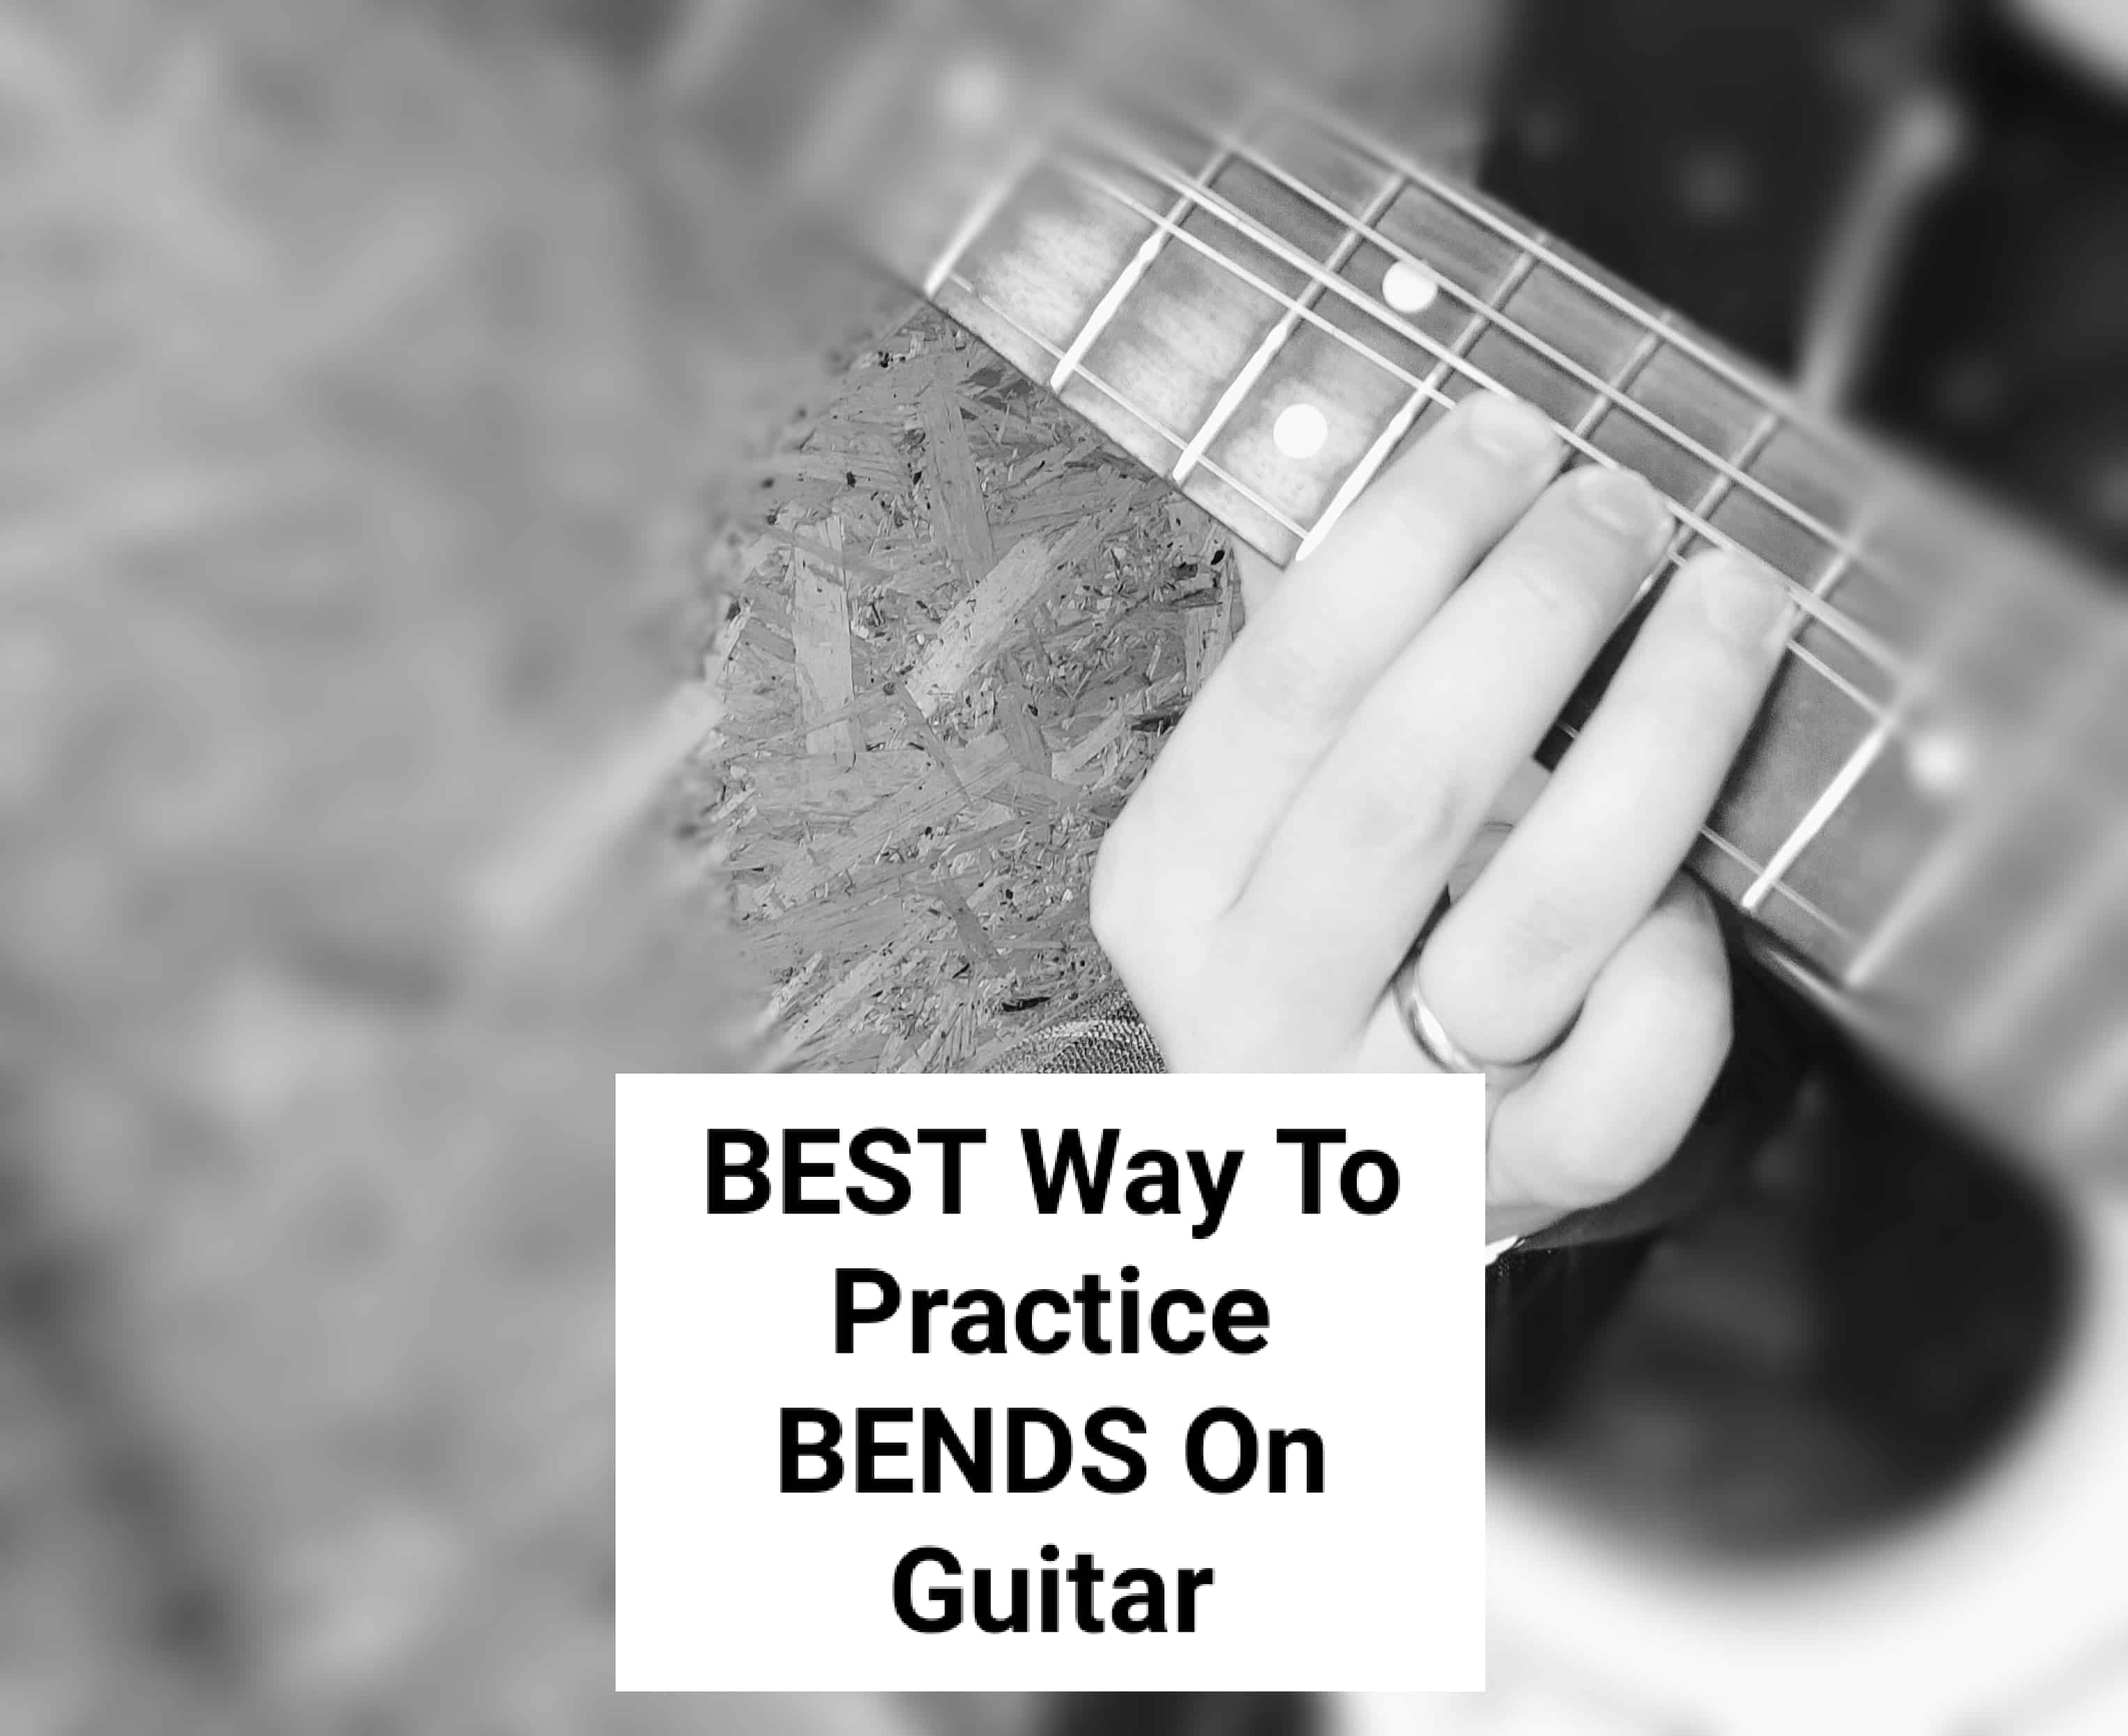 How to practice bends on guitar